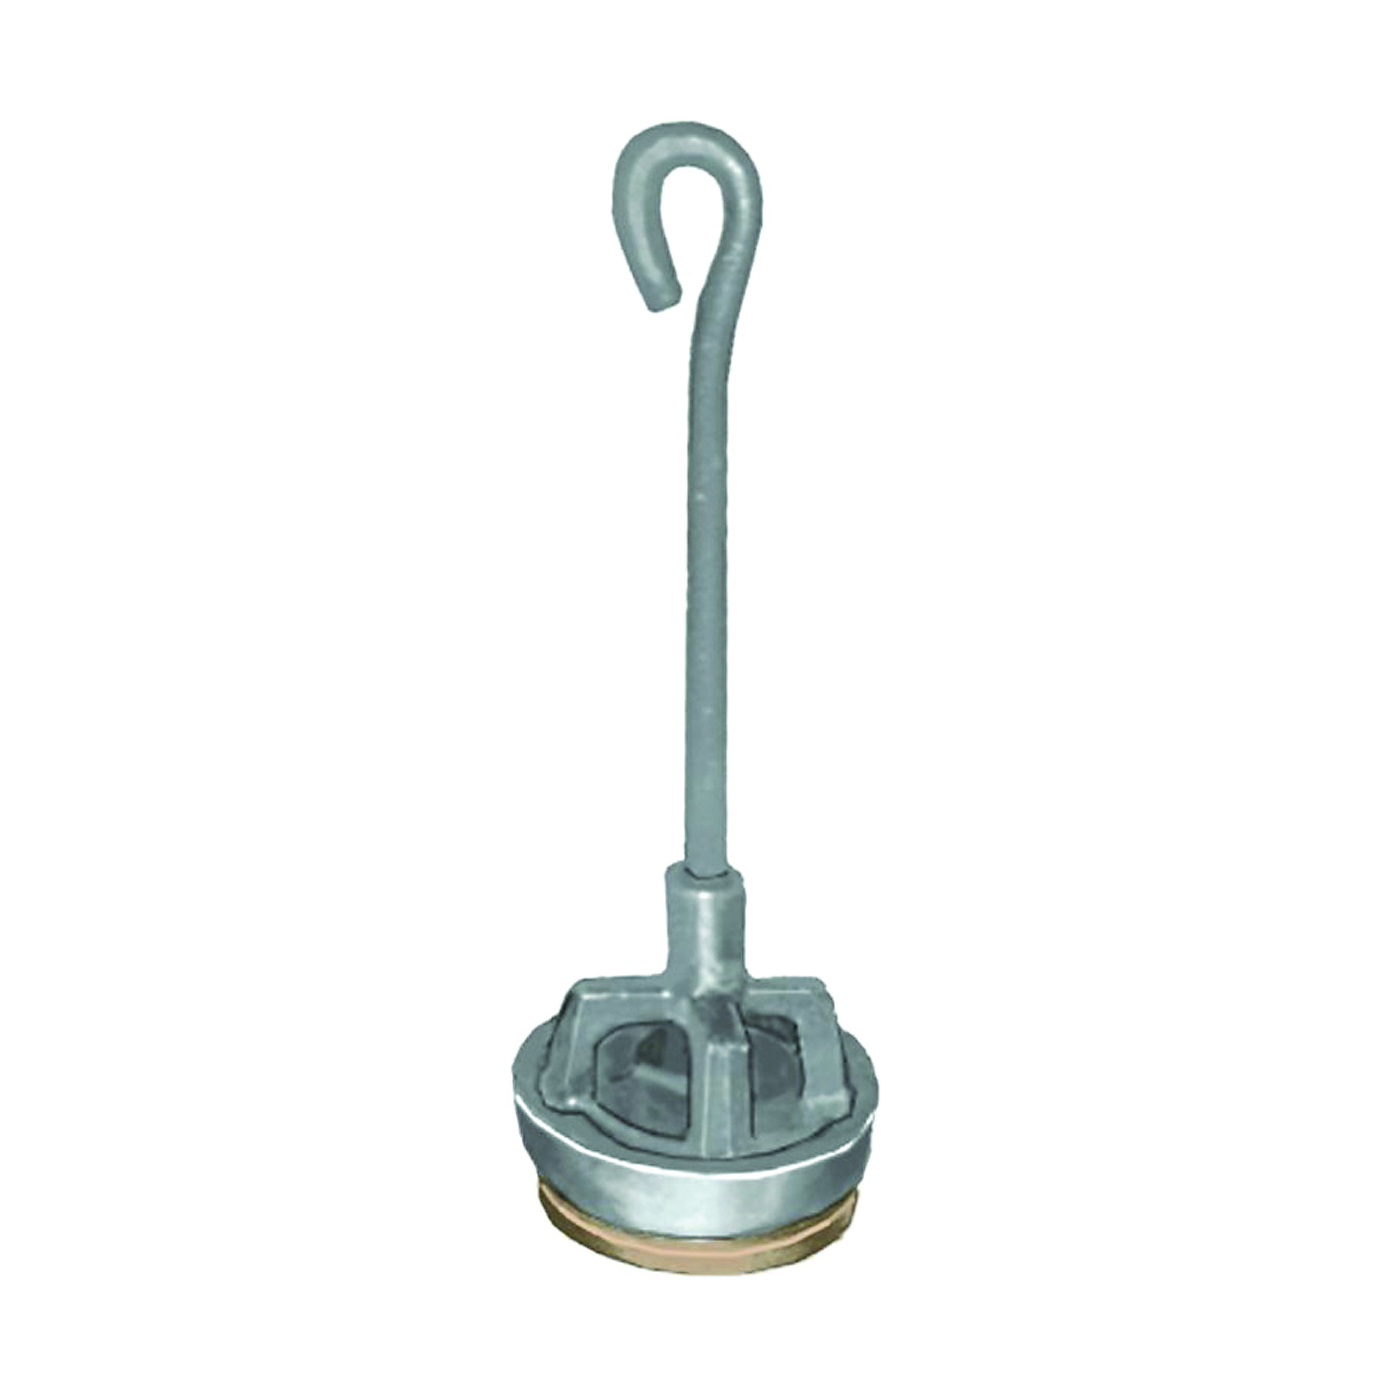 1161 Plunger Assembly, Iron, For: #1160 Pitcher Pump